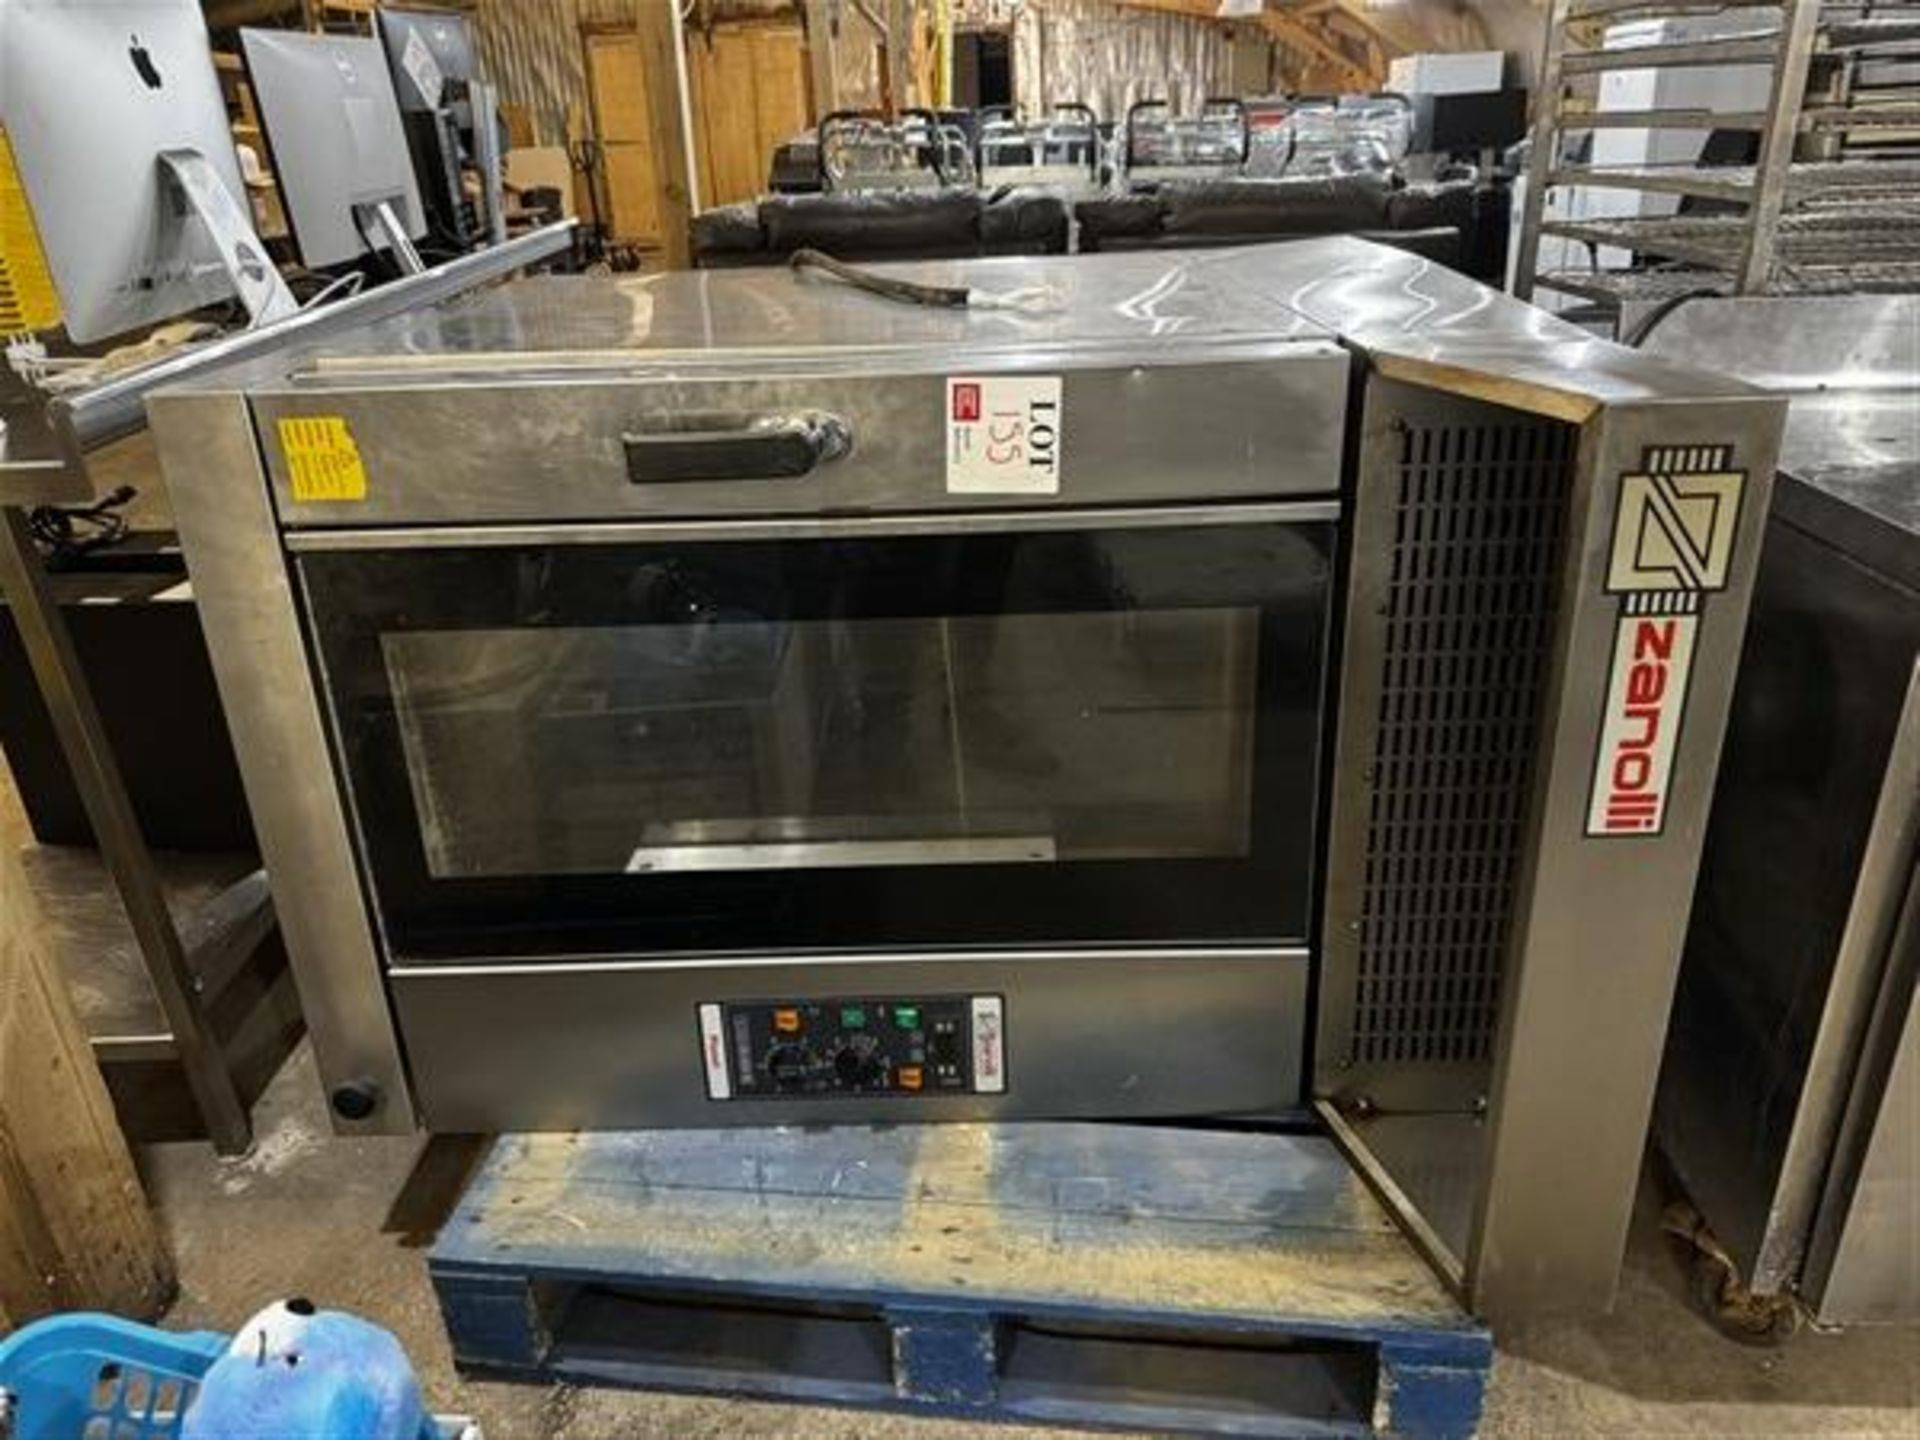 Zanolli 8 shelf convection oven with prover, Model Planet 8E-N+CAPPA, type For no Electric Vent + - Image 2 of 5